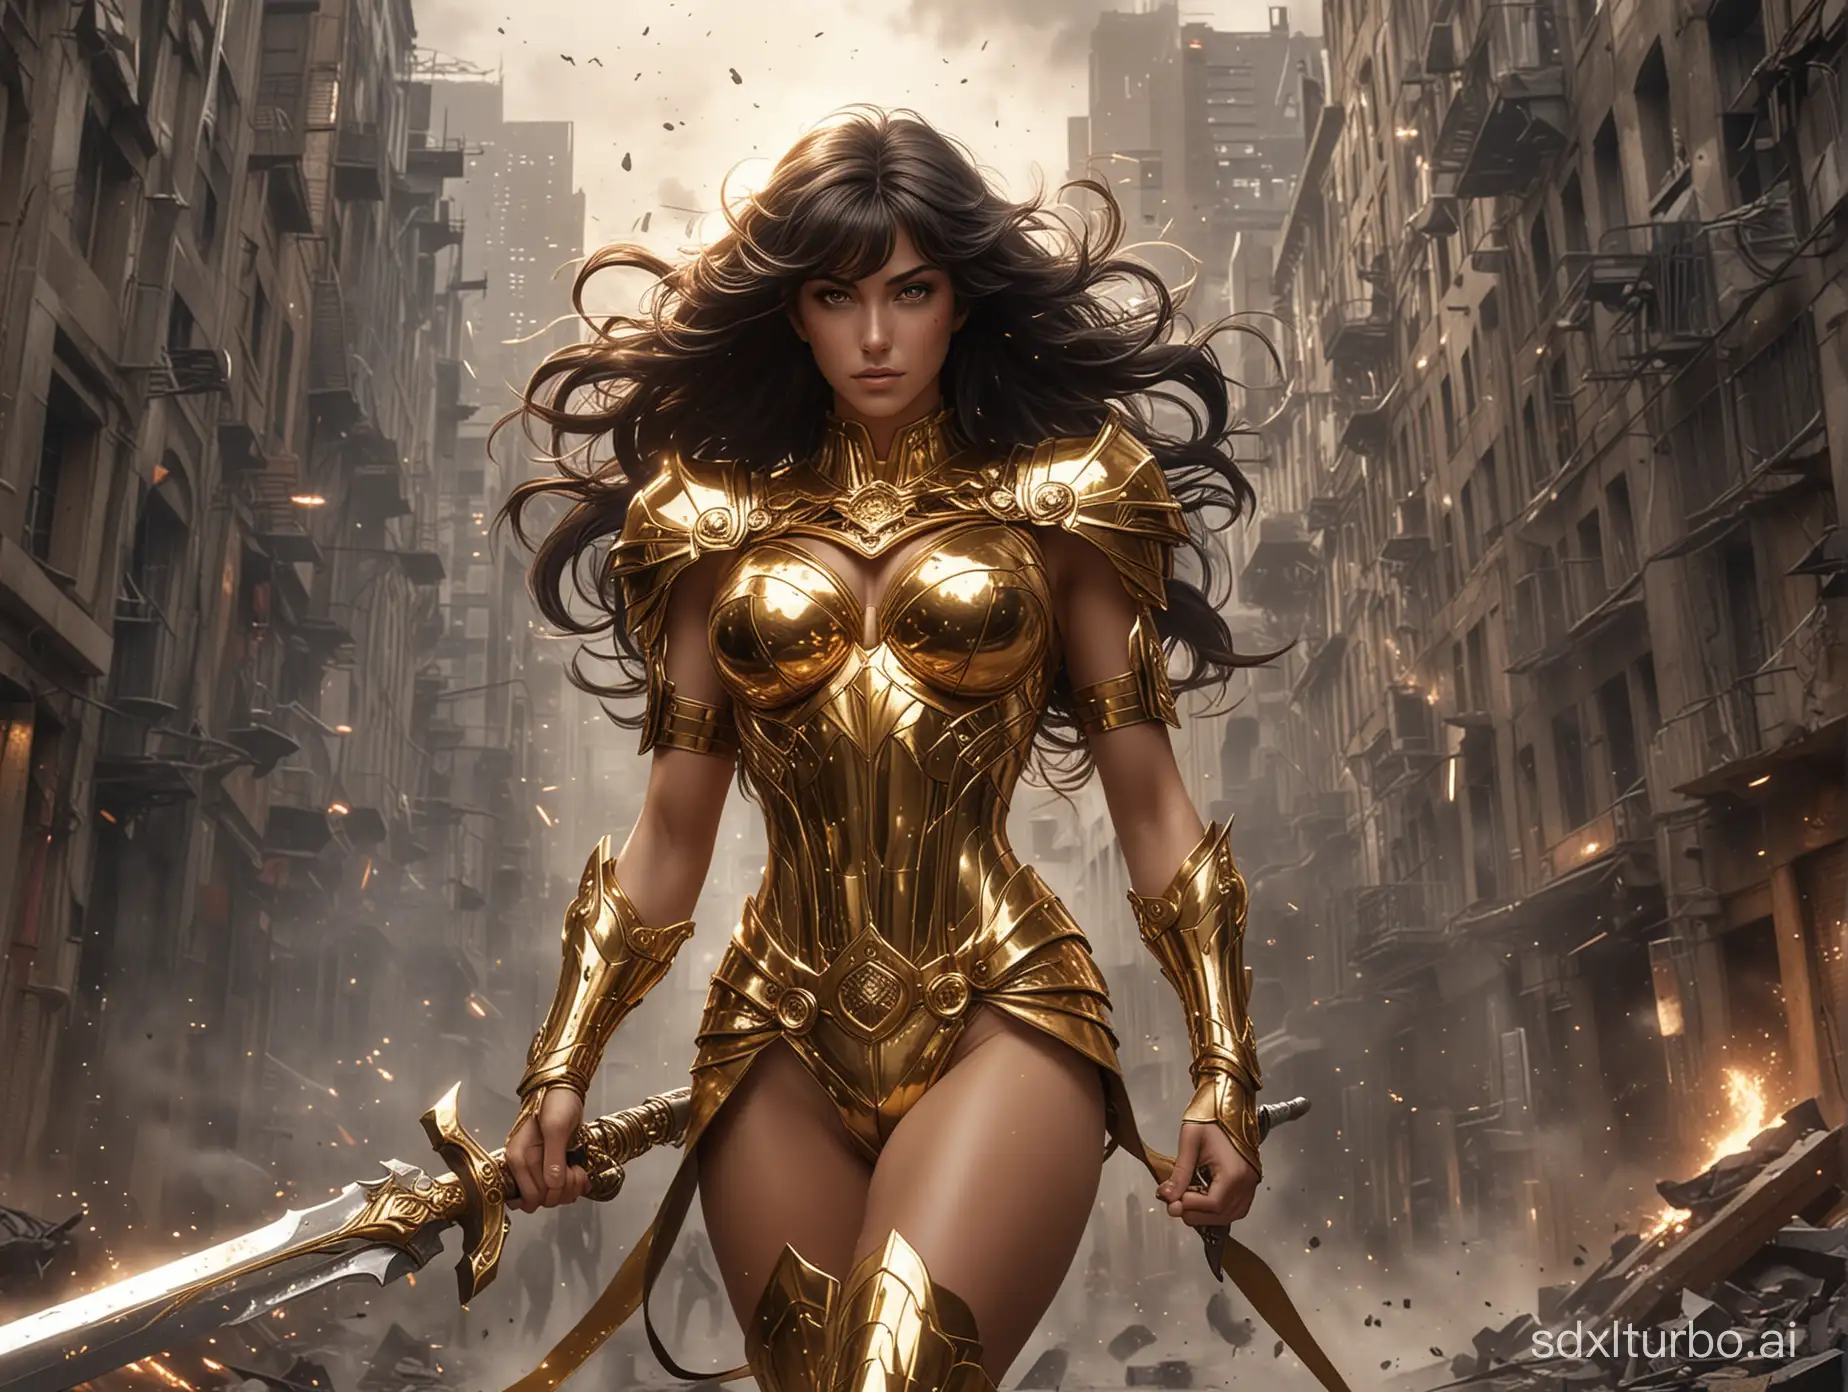 In the manga Saint Seiya, the style of the Golden Saints, Realistic style, view from below, futuristic beautiful woman with deadly golden bikini armor, futuristic weapons, holding a deadly big sword, explosions lighting up the night, smoke, sparks, destroyed buildings, rubble, debris, in the style of Gerald Brom and Dan Abnet, high details, 16k, Unreal Engine 5, Stylish women, mythical warrior princess